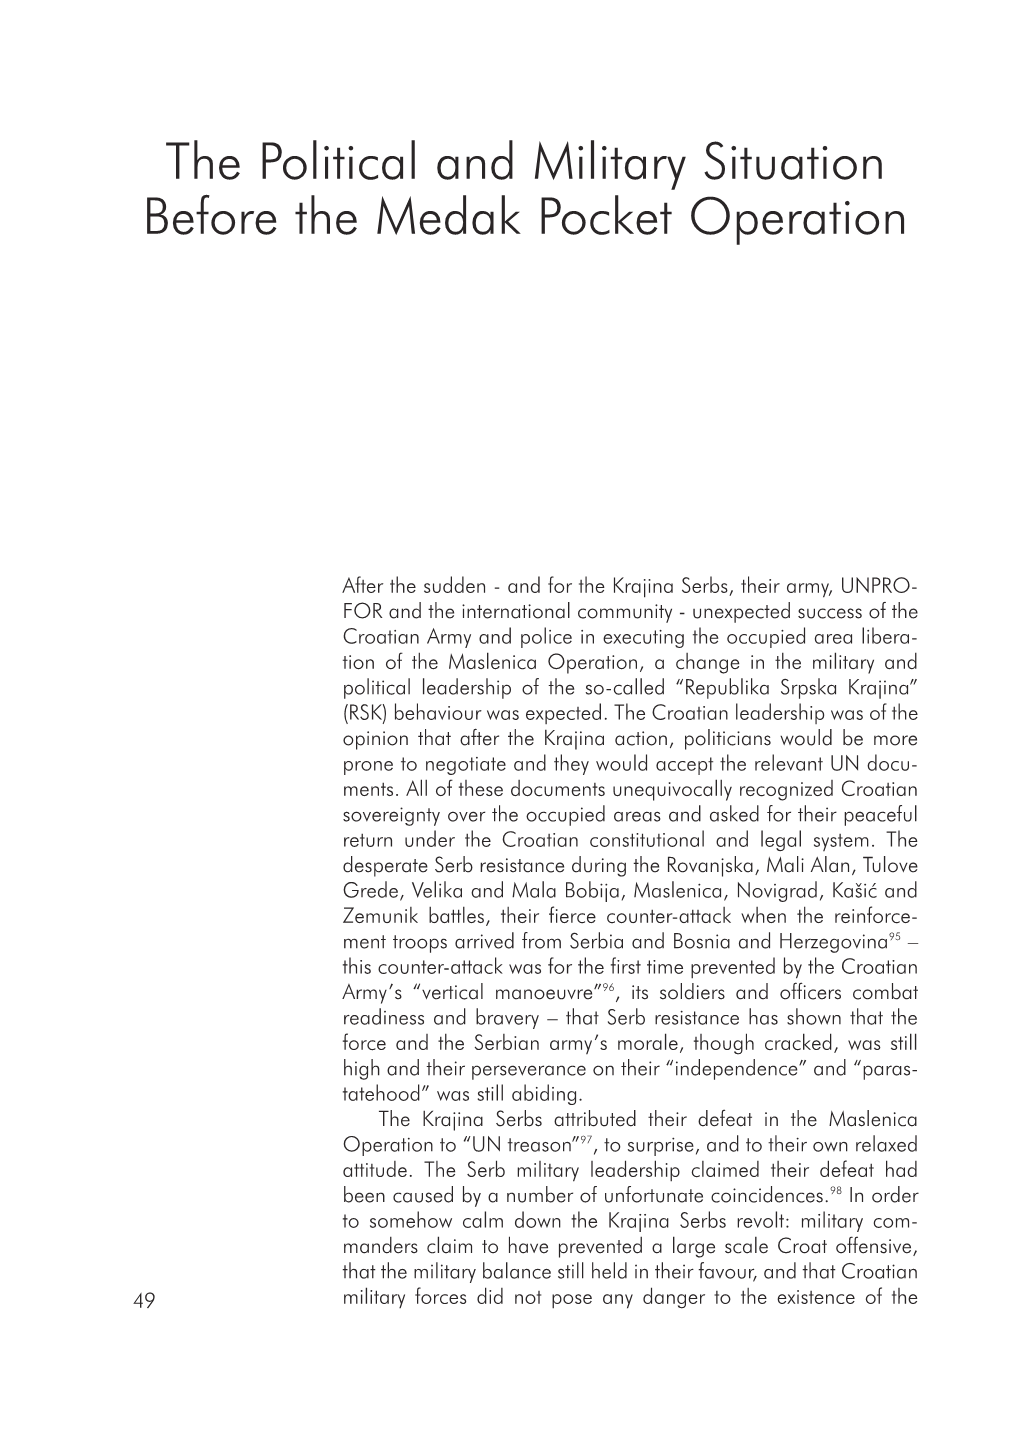 The Political and Military Situation Before the Medak Pocket Operation